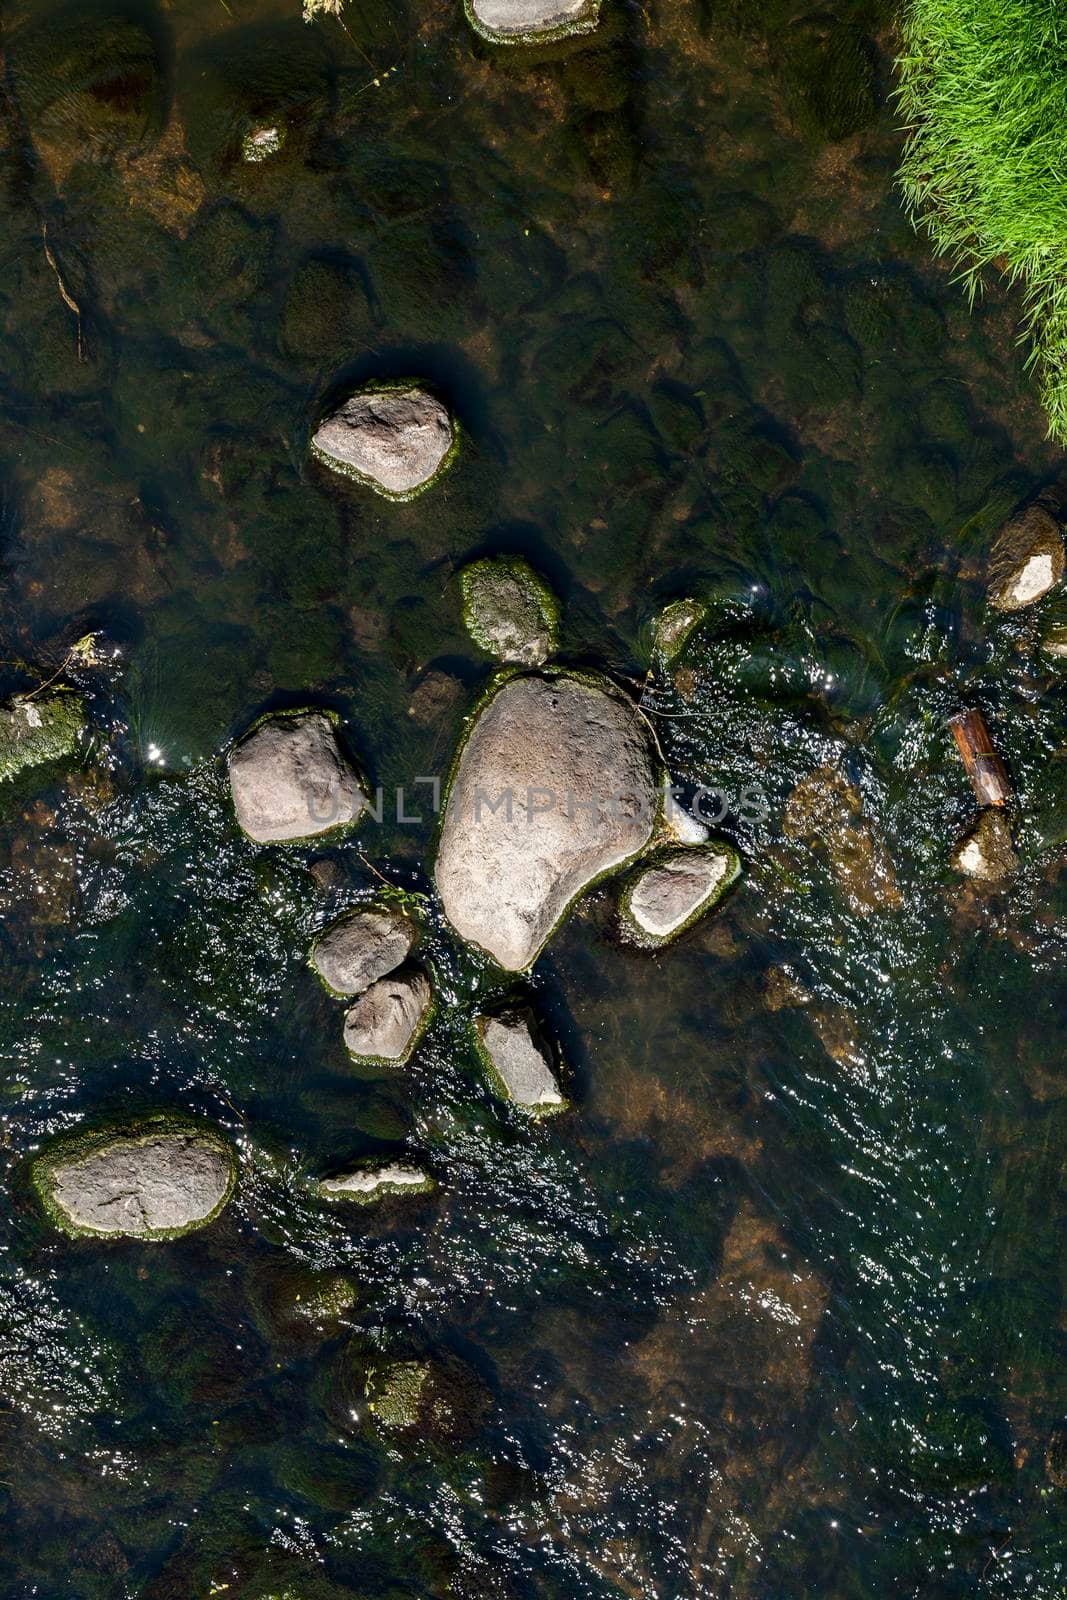 A small river with dark water in the middle of which lies stones and cobblestones, close-up photo